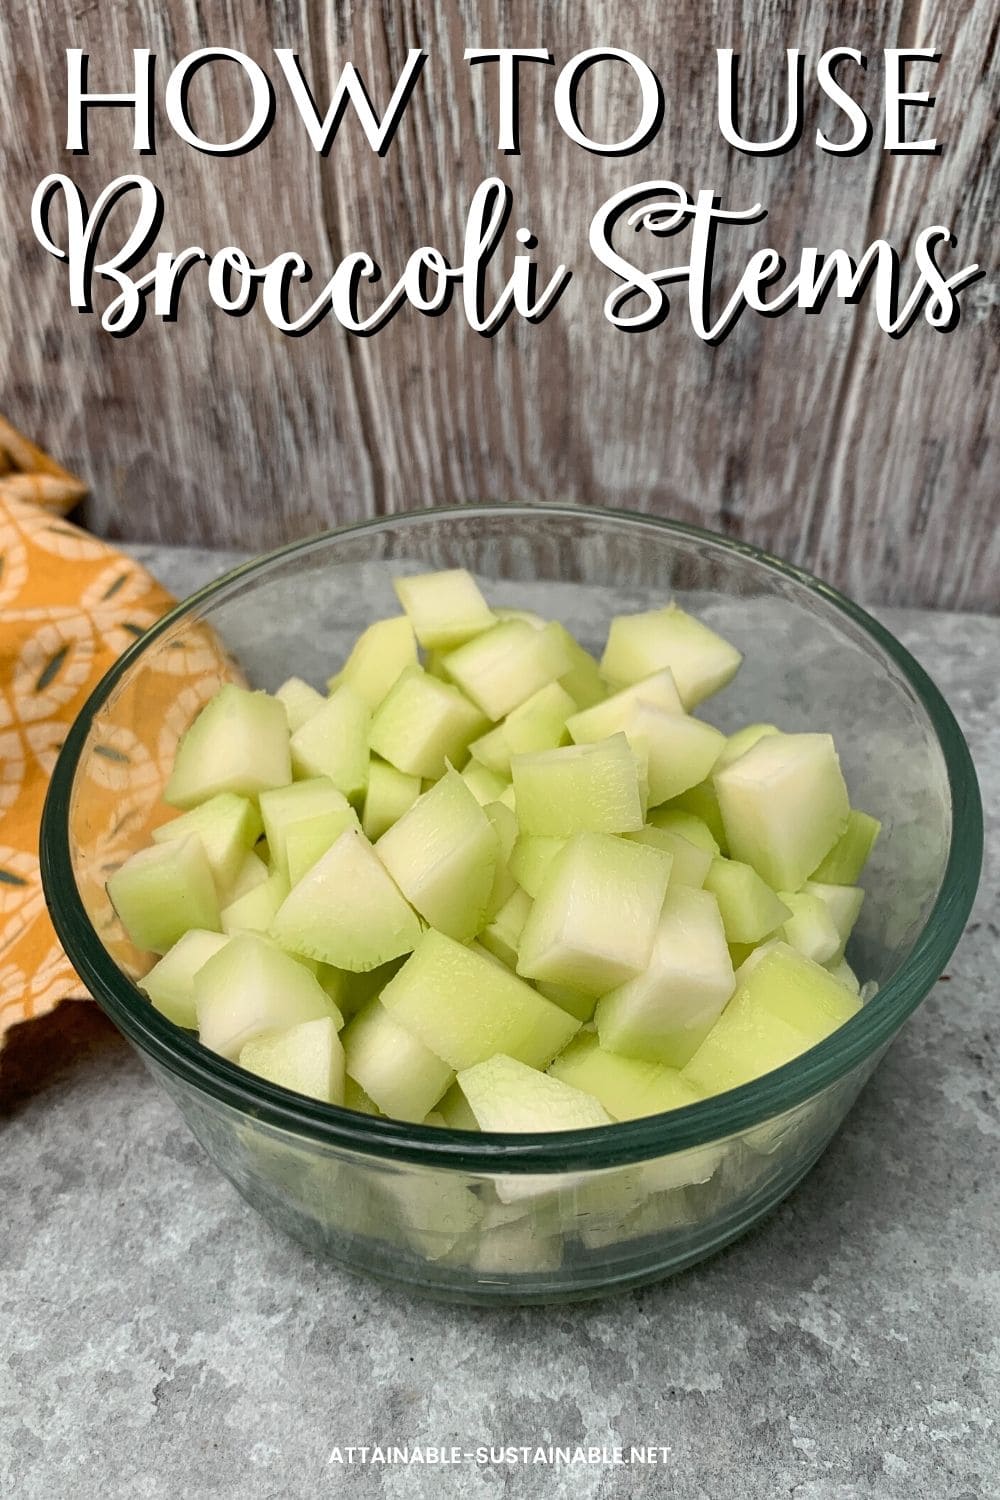 broccoli stems, cubed in a bowl.